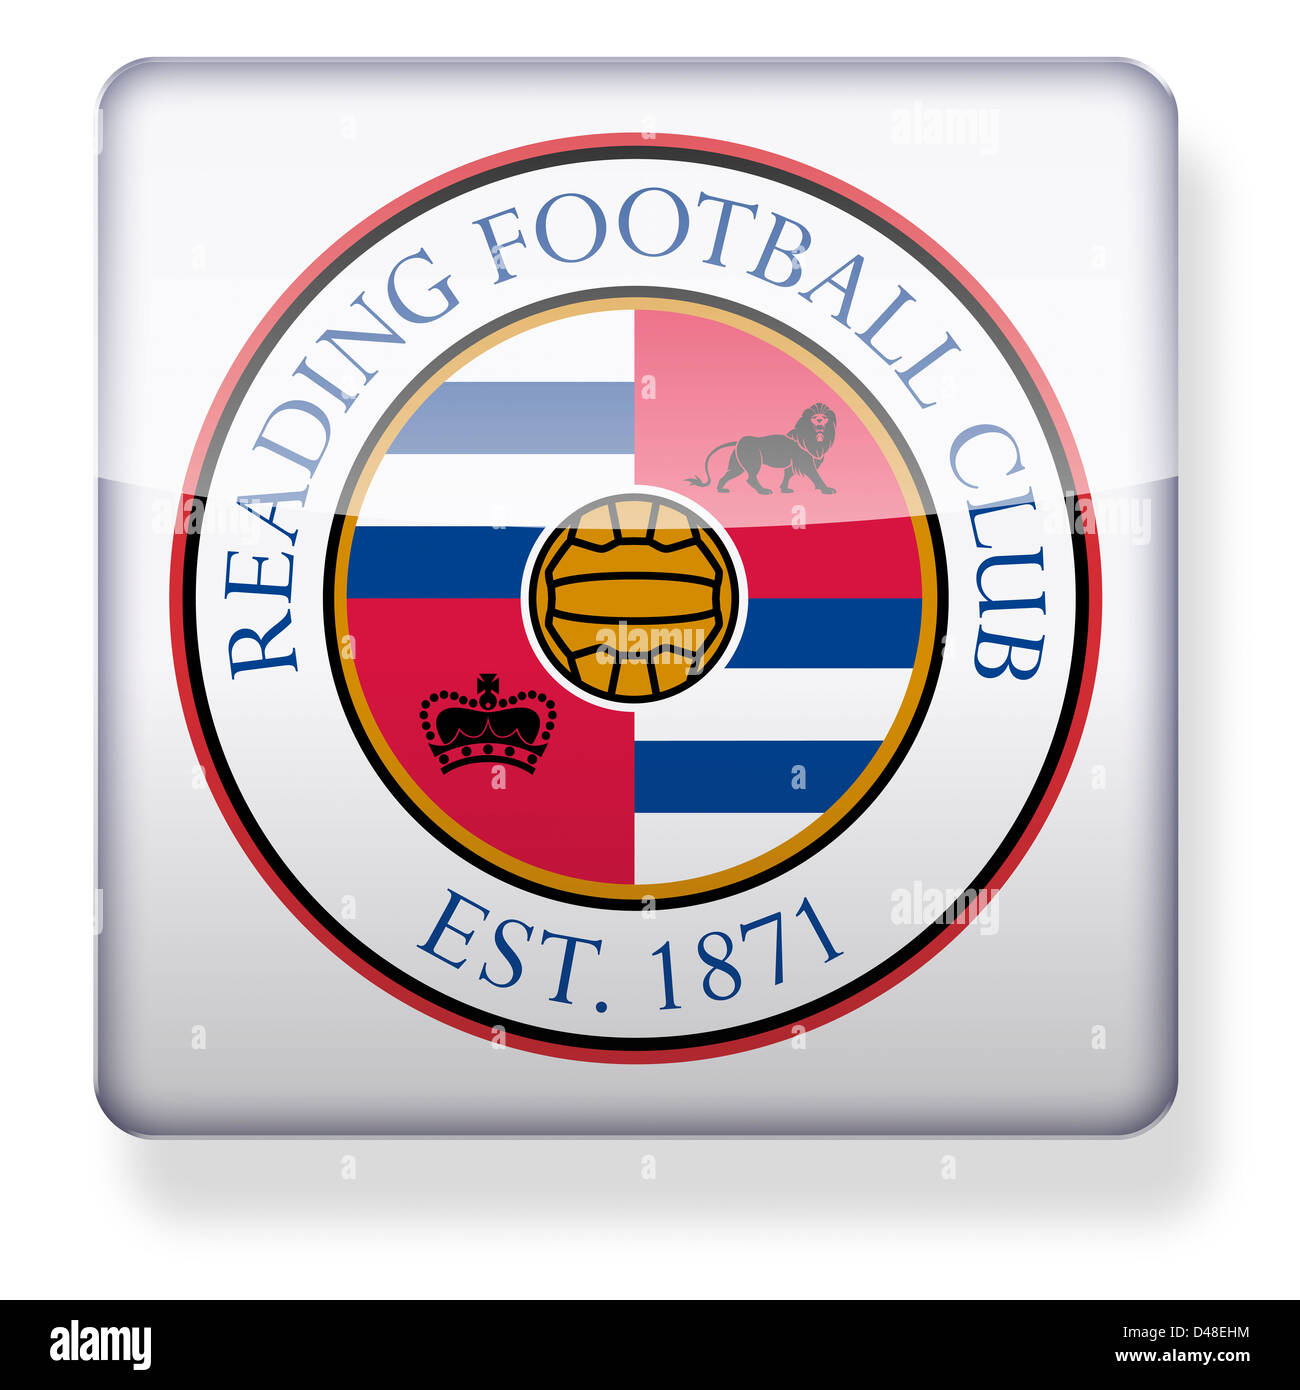 Reading football club logo as an app icon. Clipping path included. Stock Photo